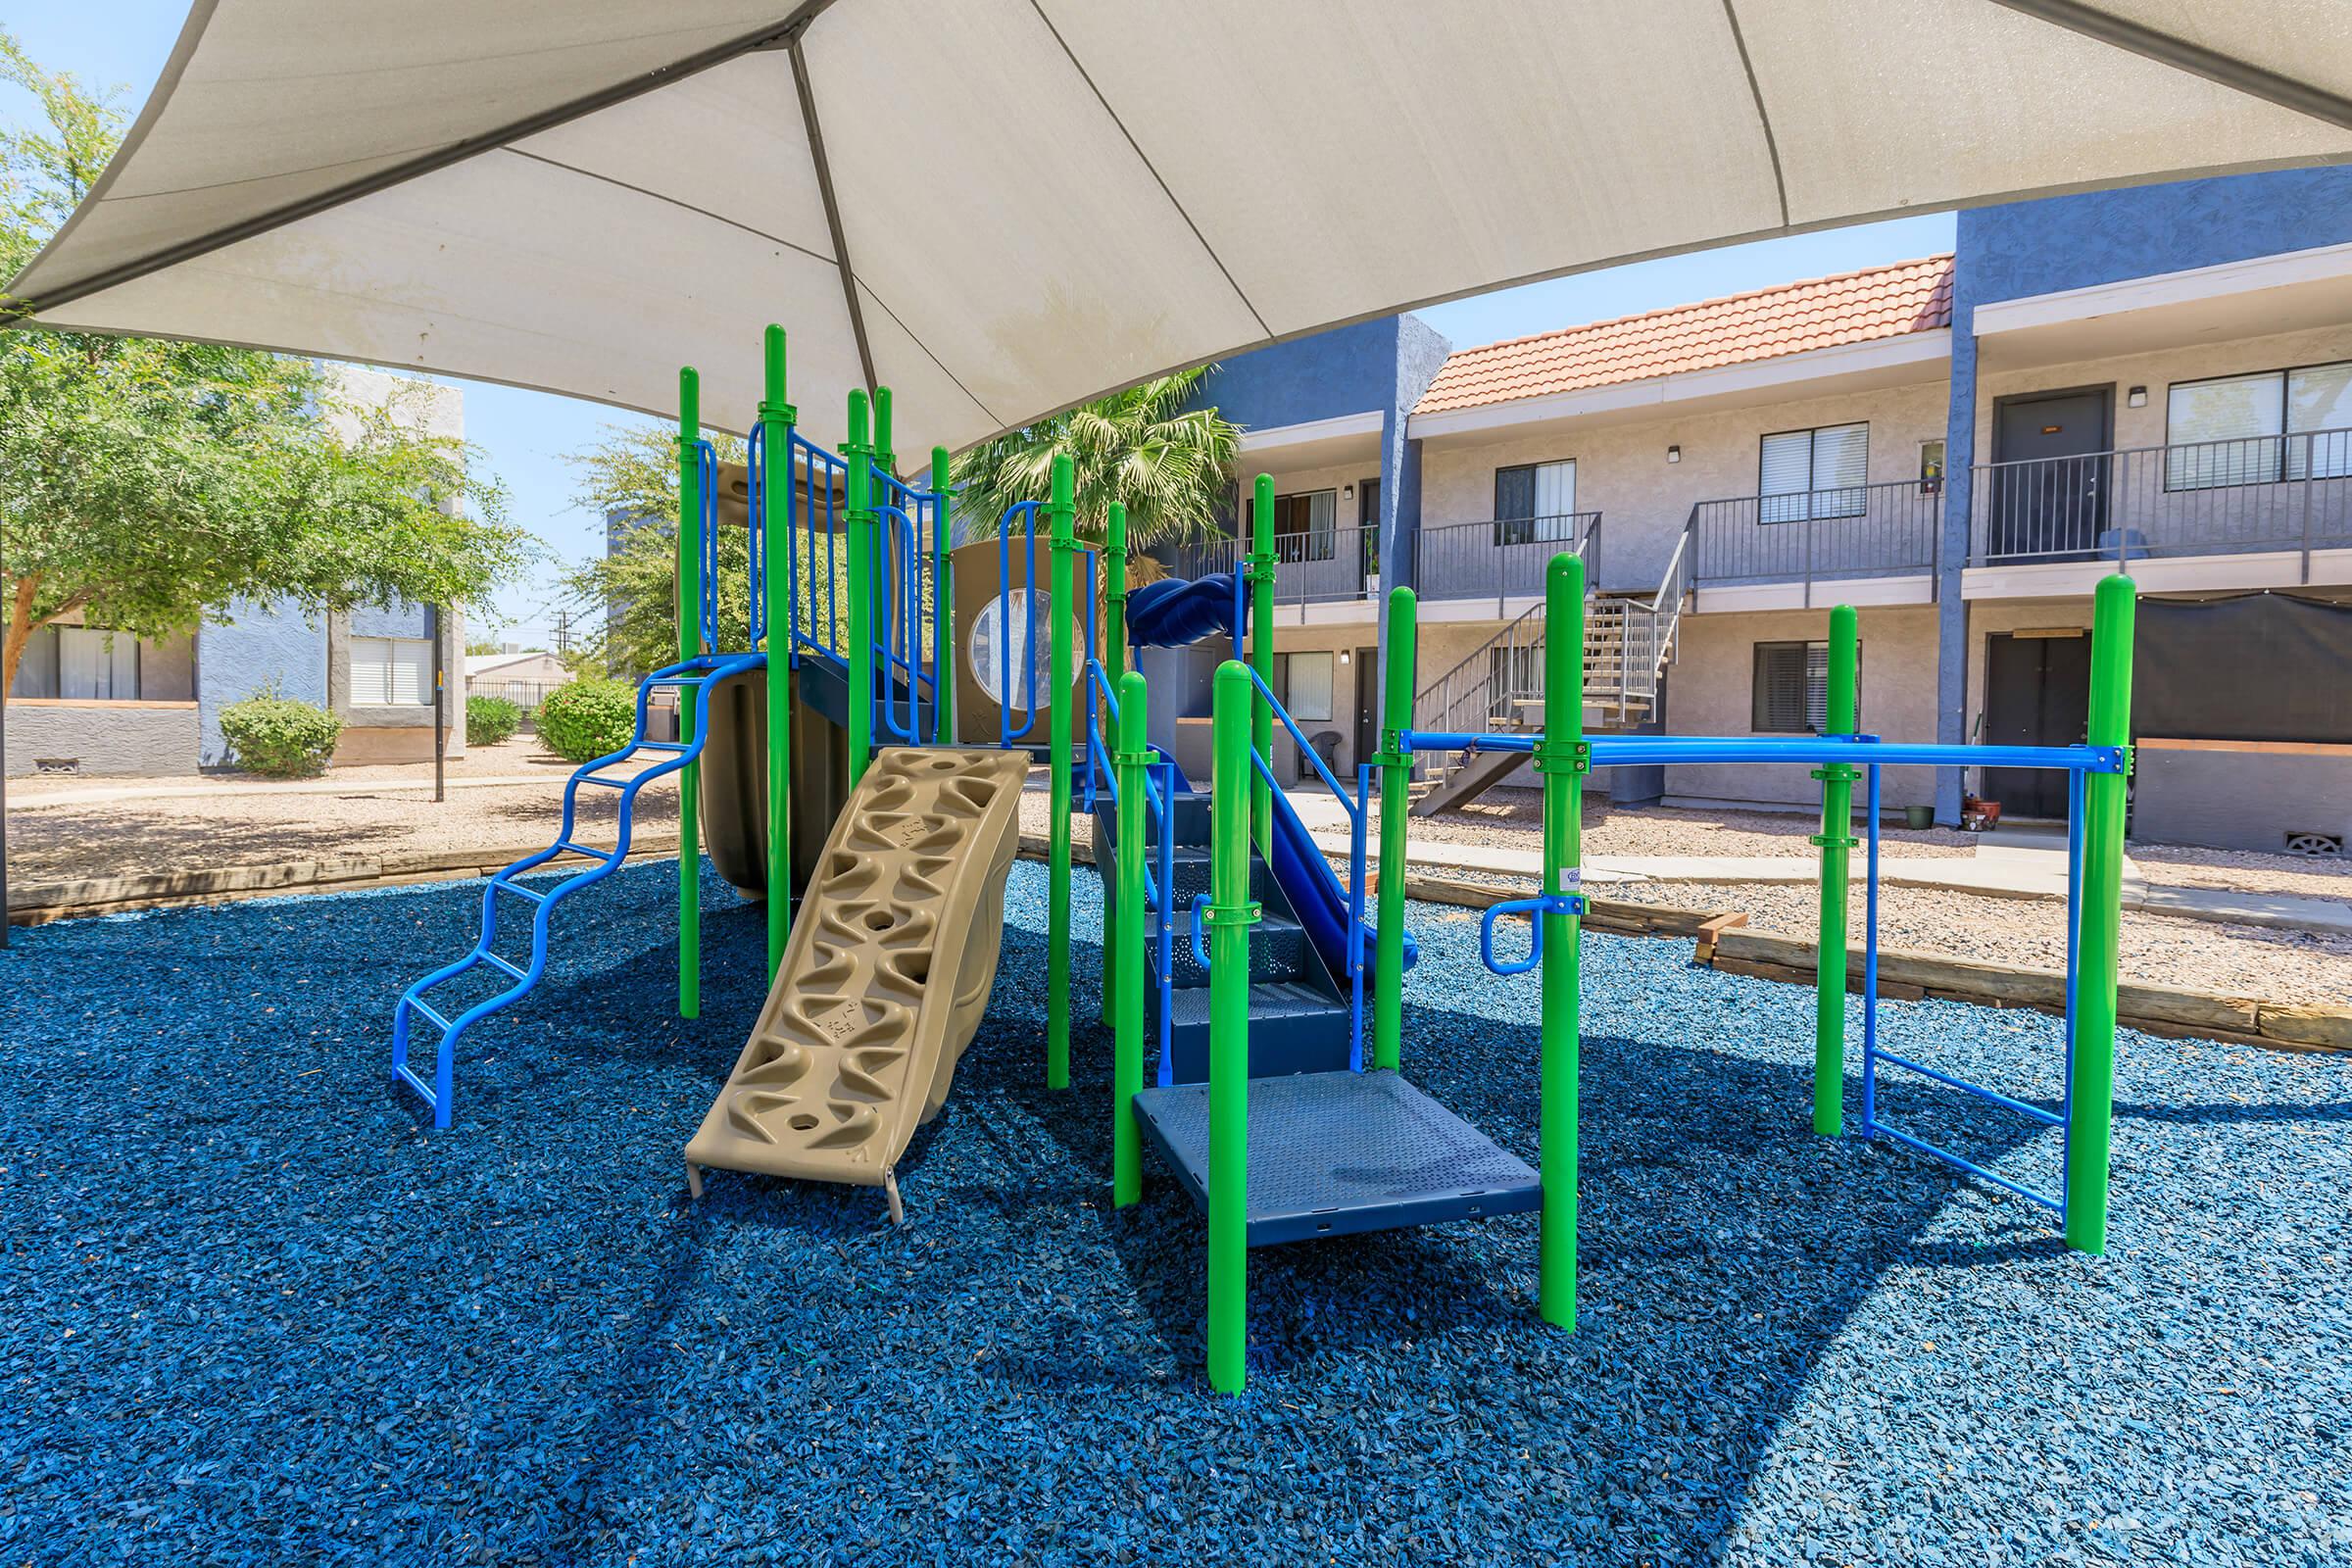 Outdoor green and blue playground set covered by a large shaded awning